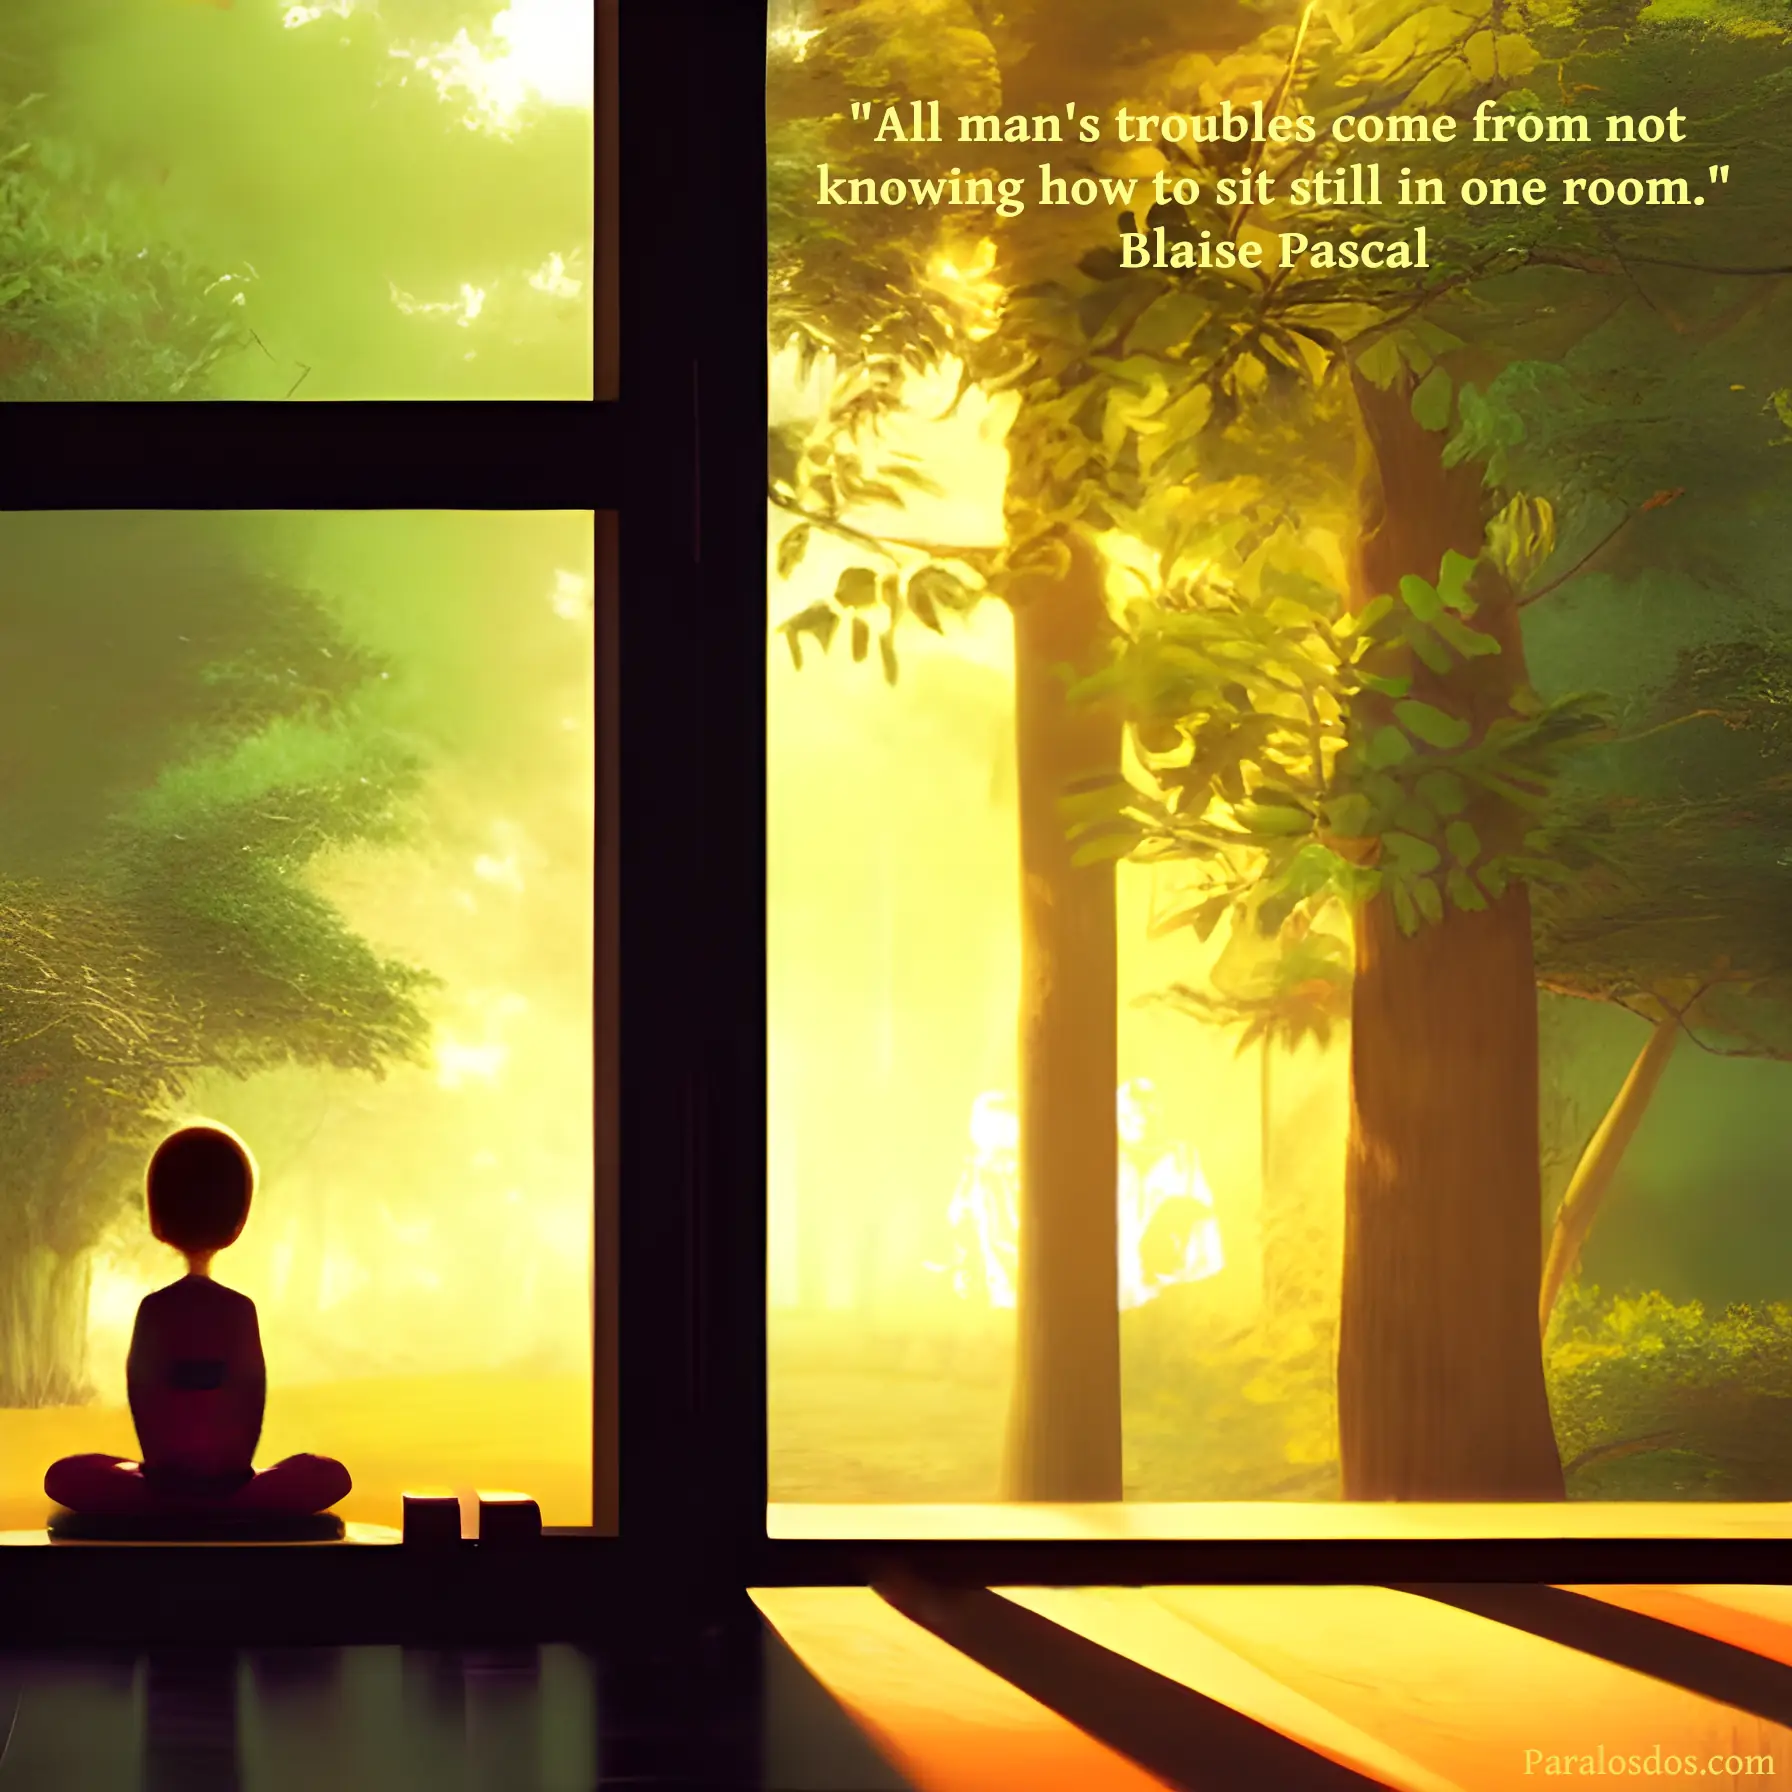 An artistic rendering of a figure seated in a room that opens on to a sunlit forest. The quote reads: "All man's troubles come from not knowing how to sit still in one room." Blaise Pascal